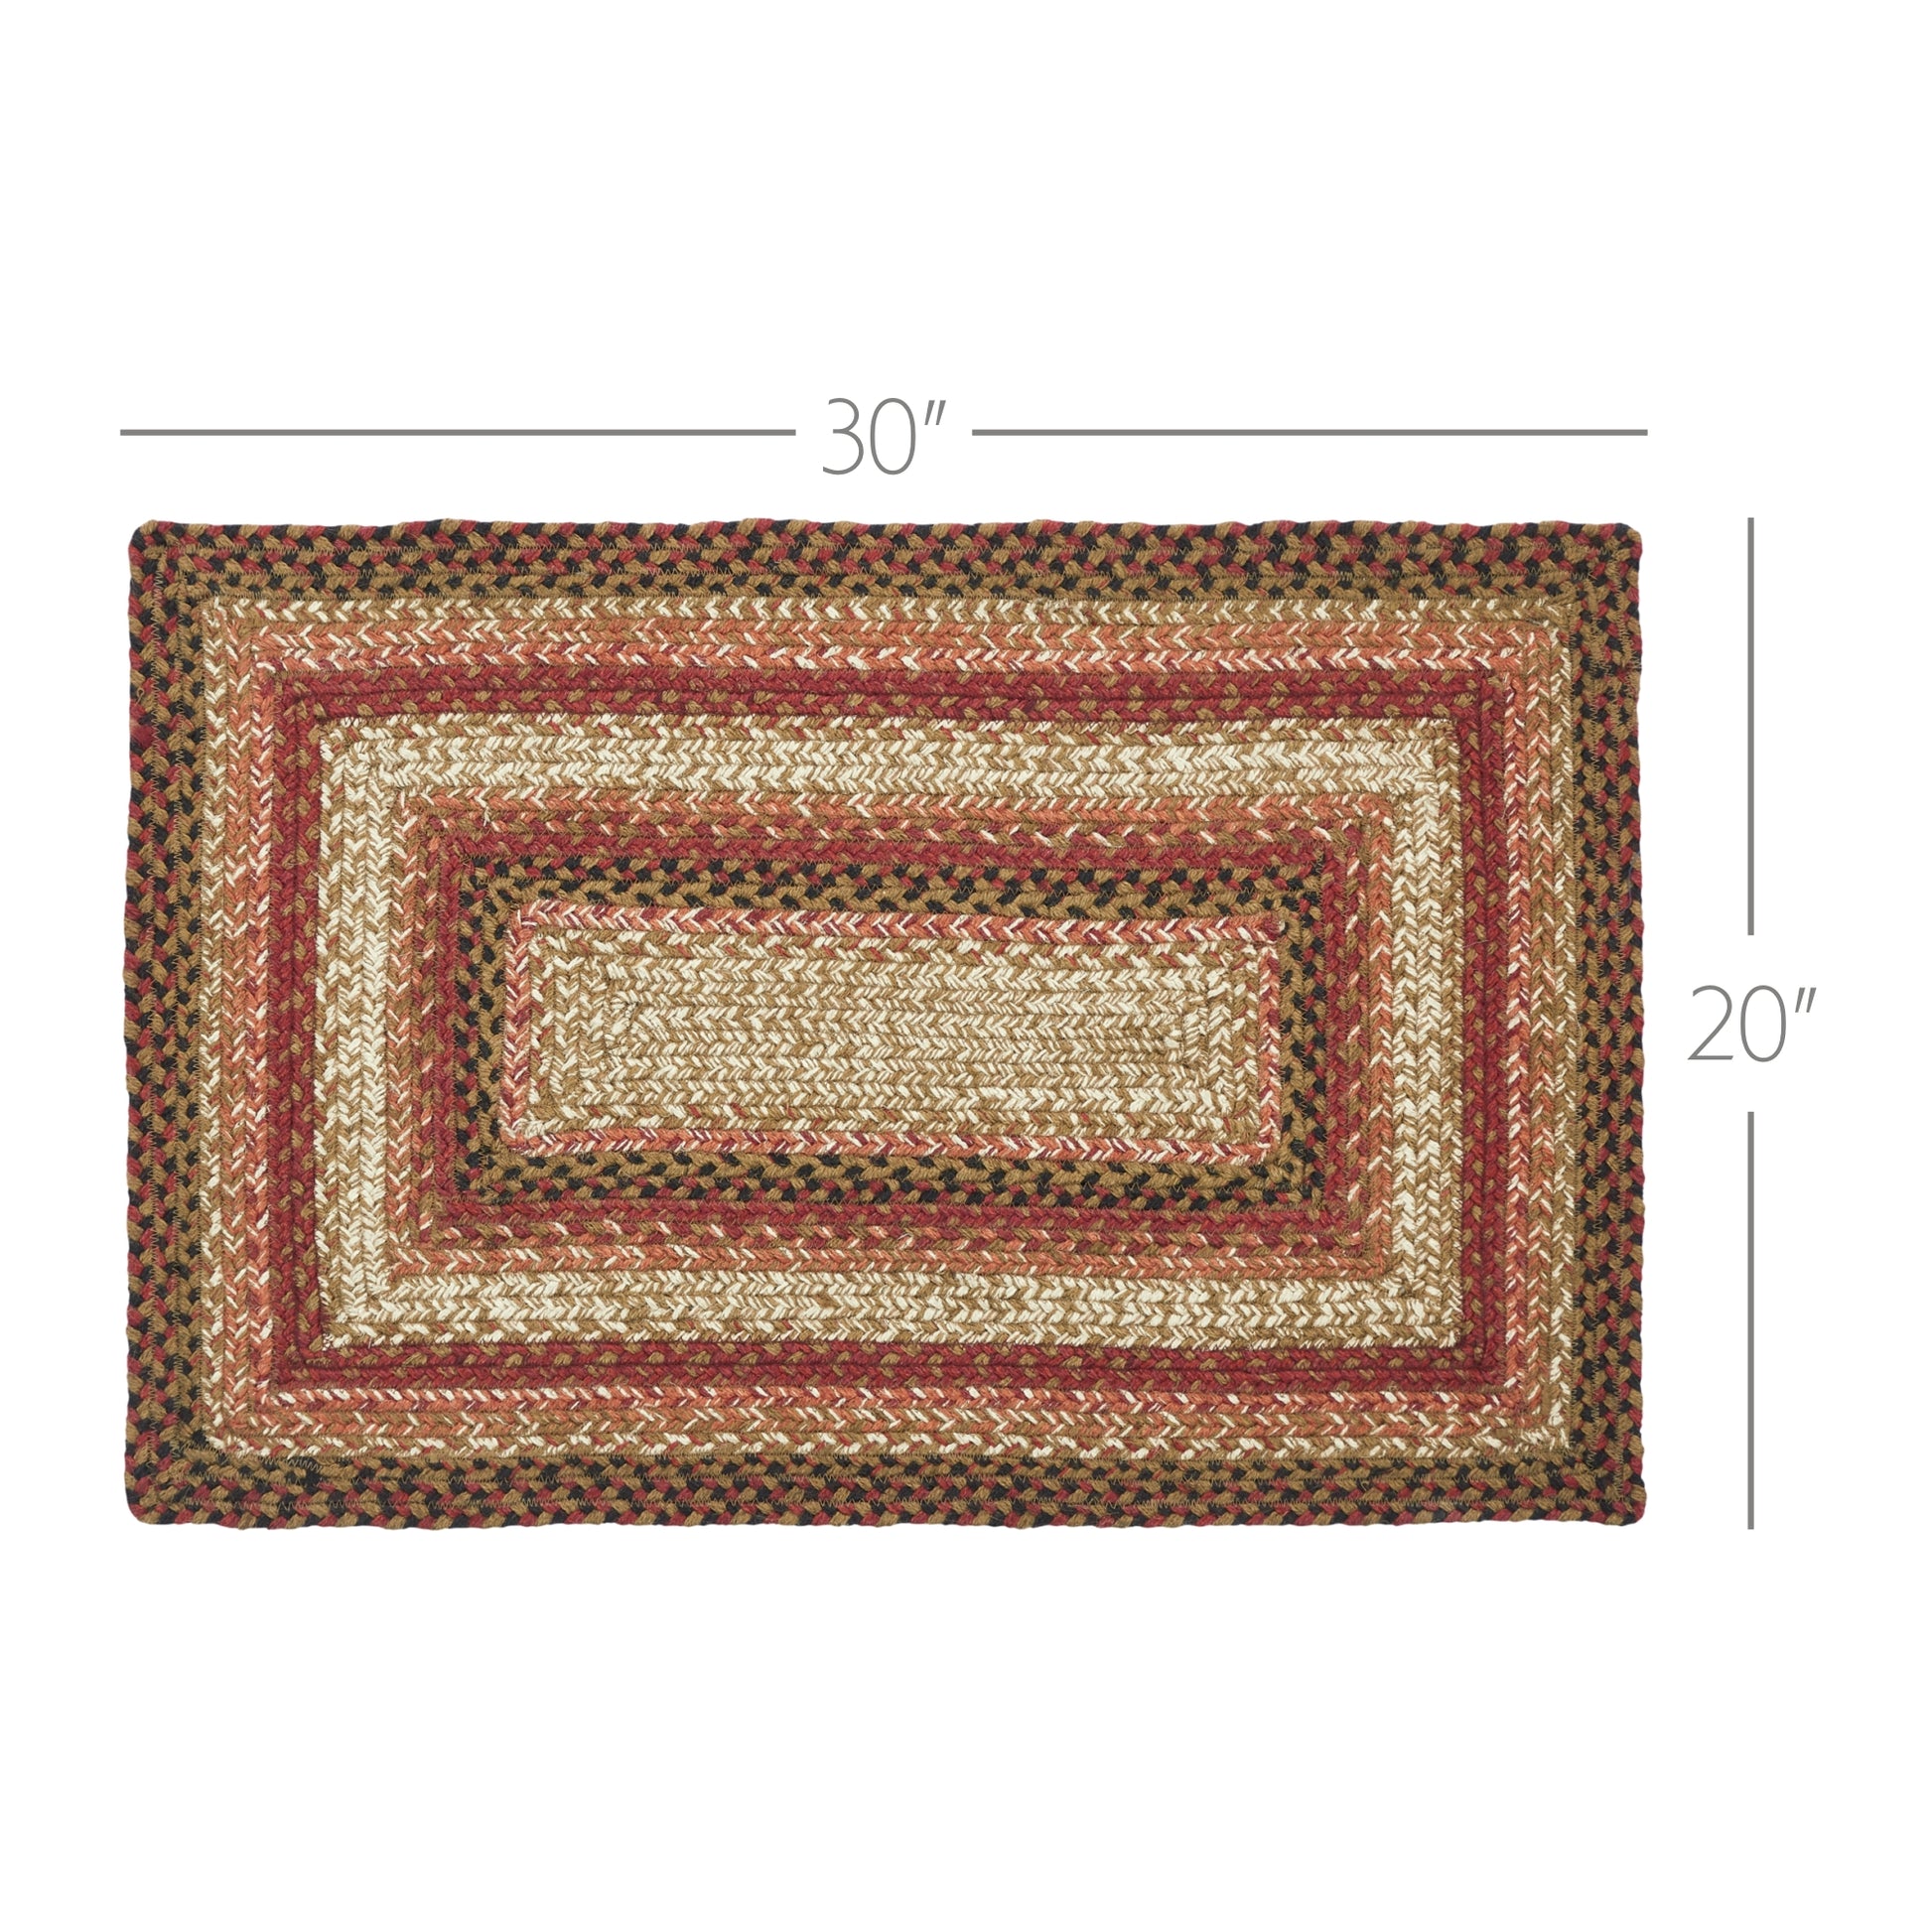 67117-Ginger-Spice-Jute-Rug-Rect-w-Pad-20x30-image-3